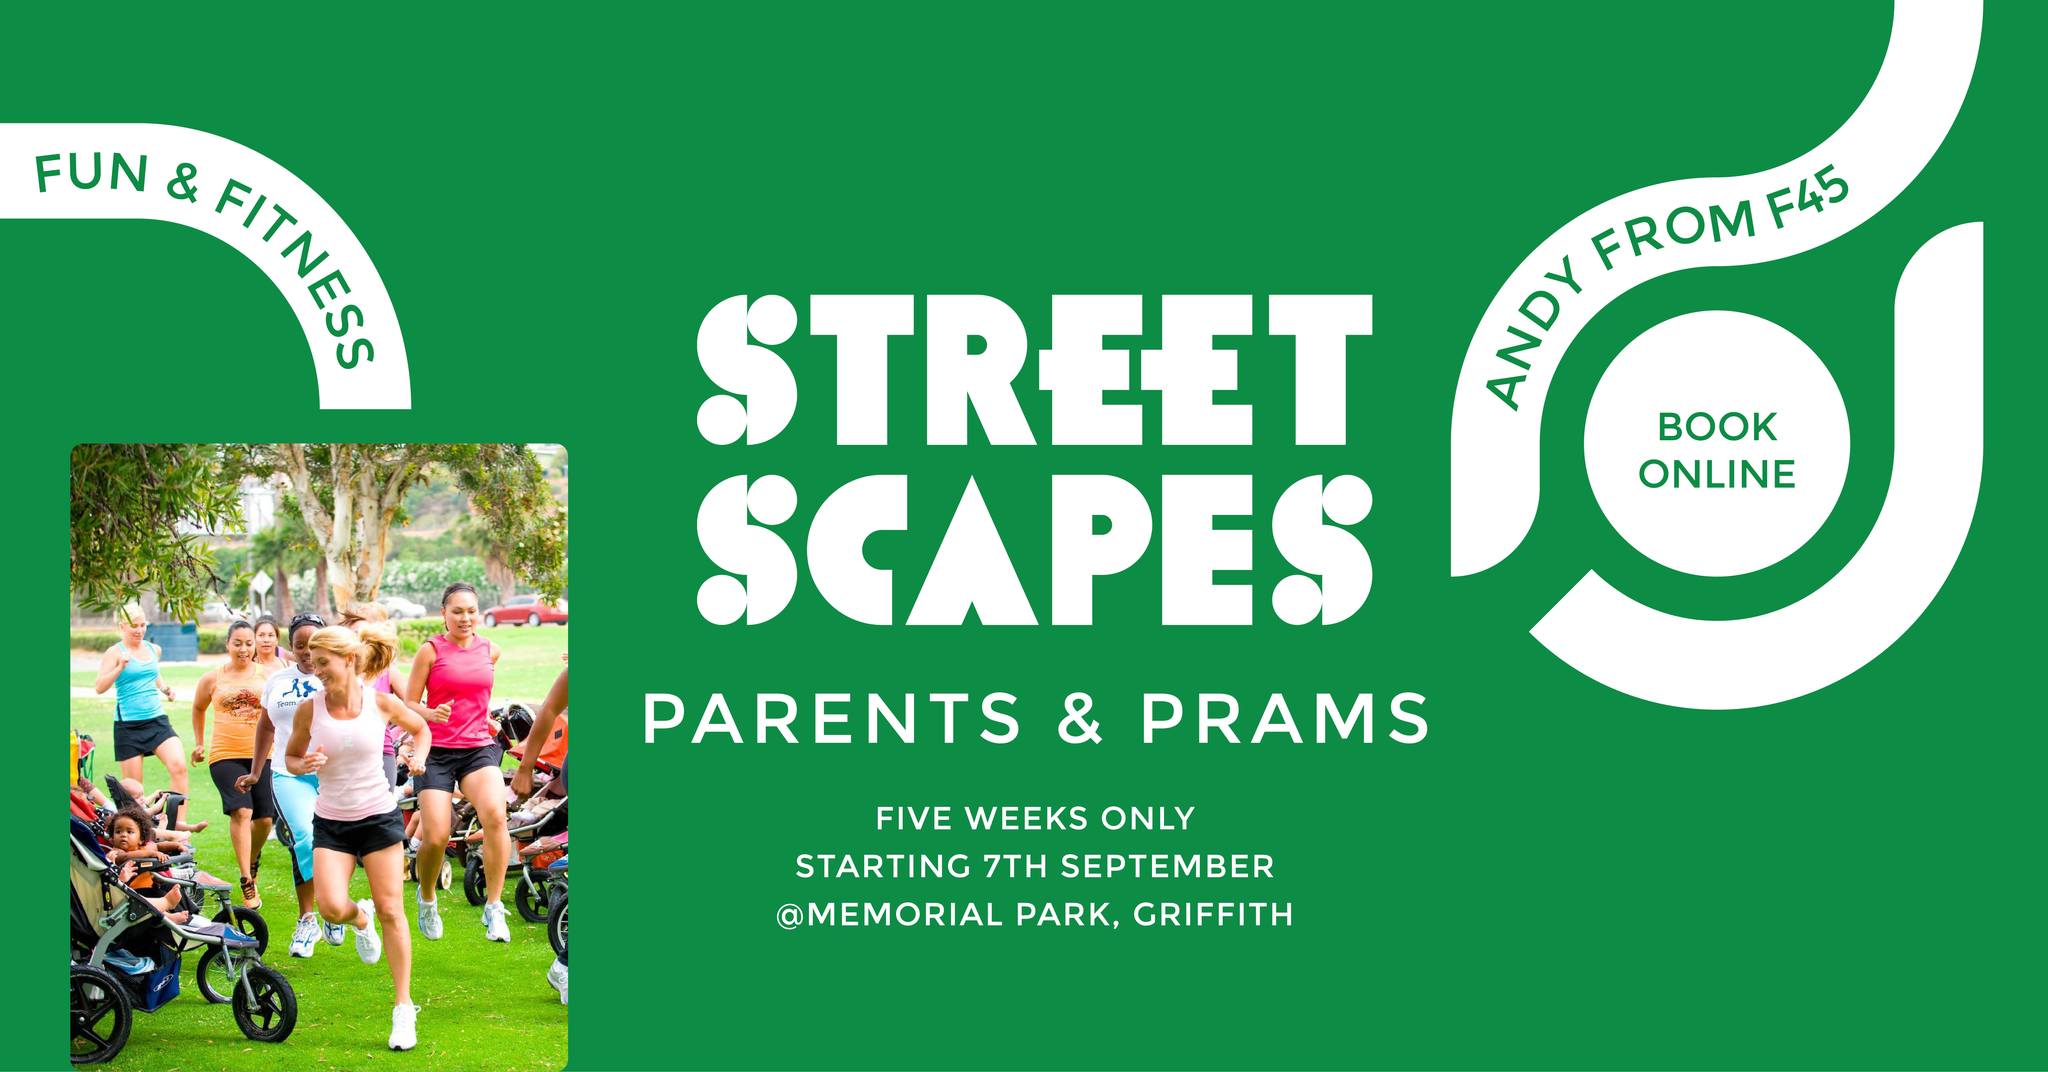 Streets Scapes Griffith - Parents & Prams Fitness Fun